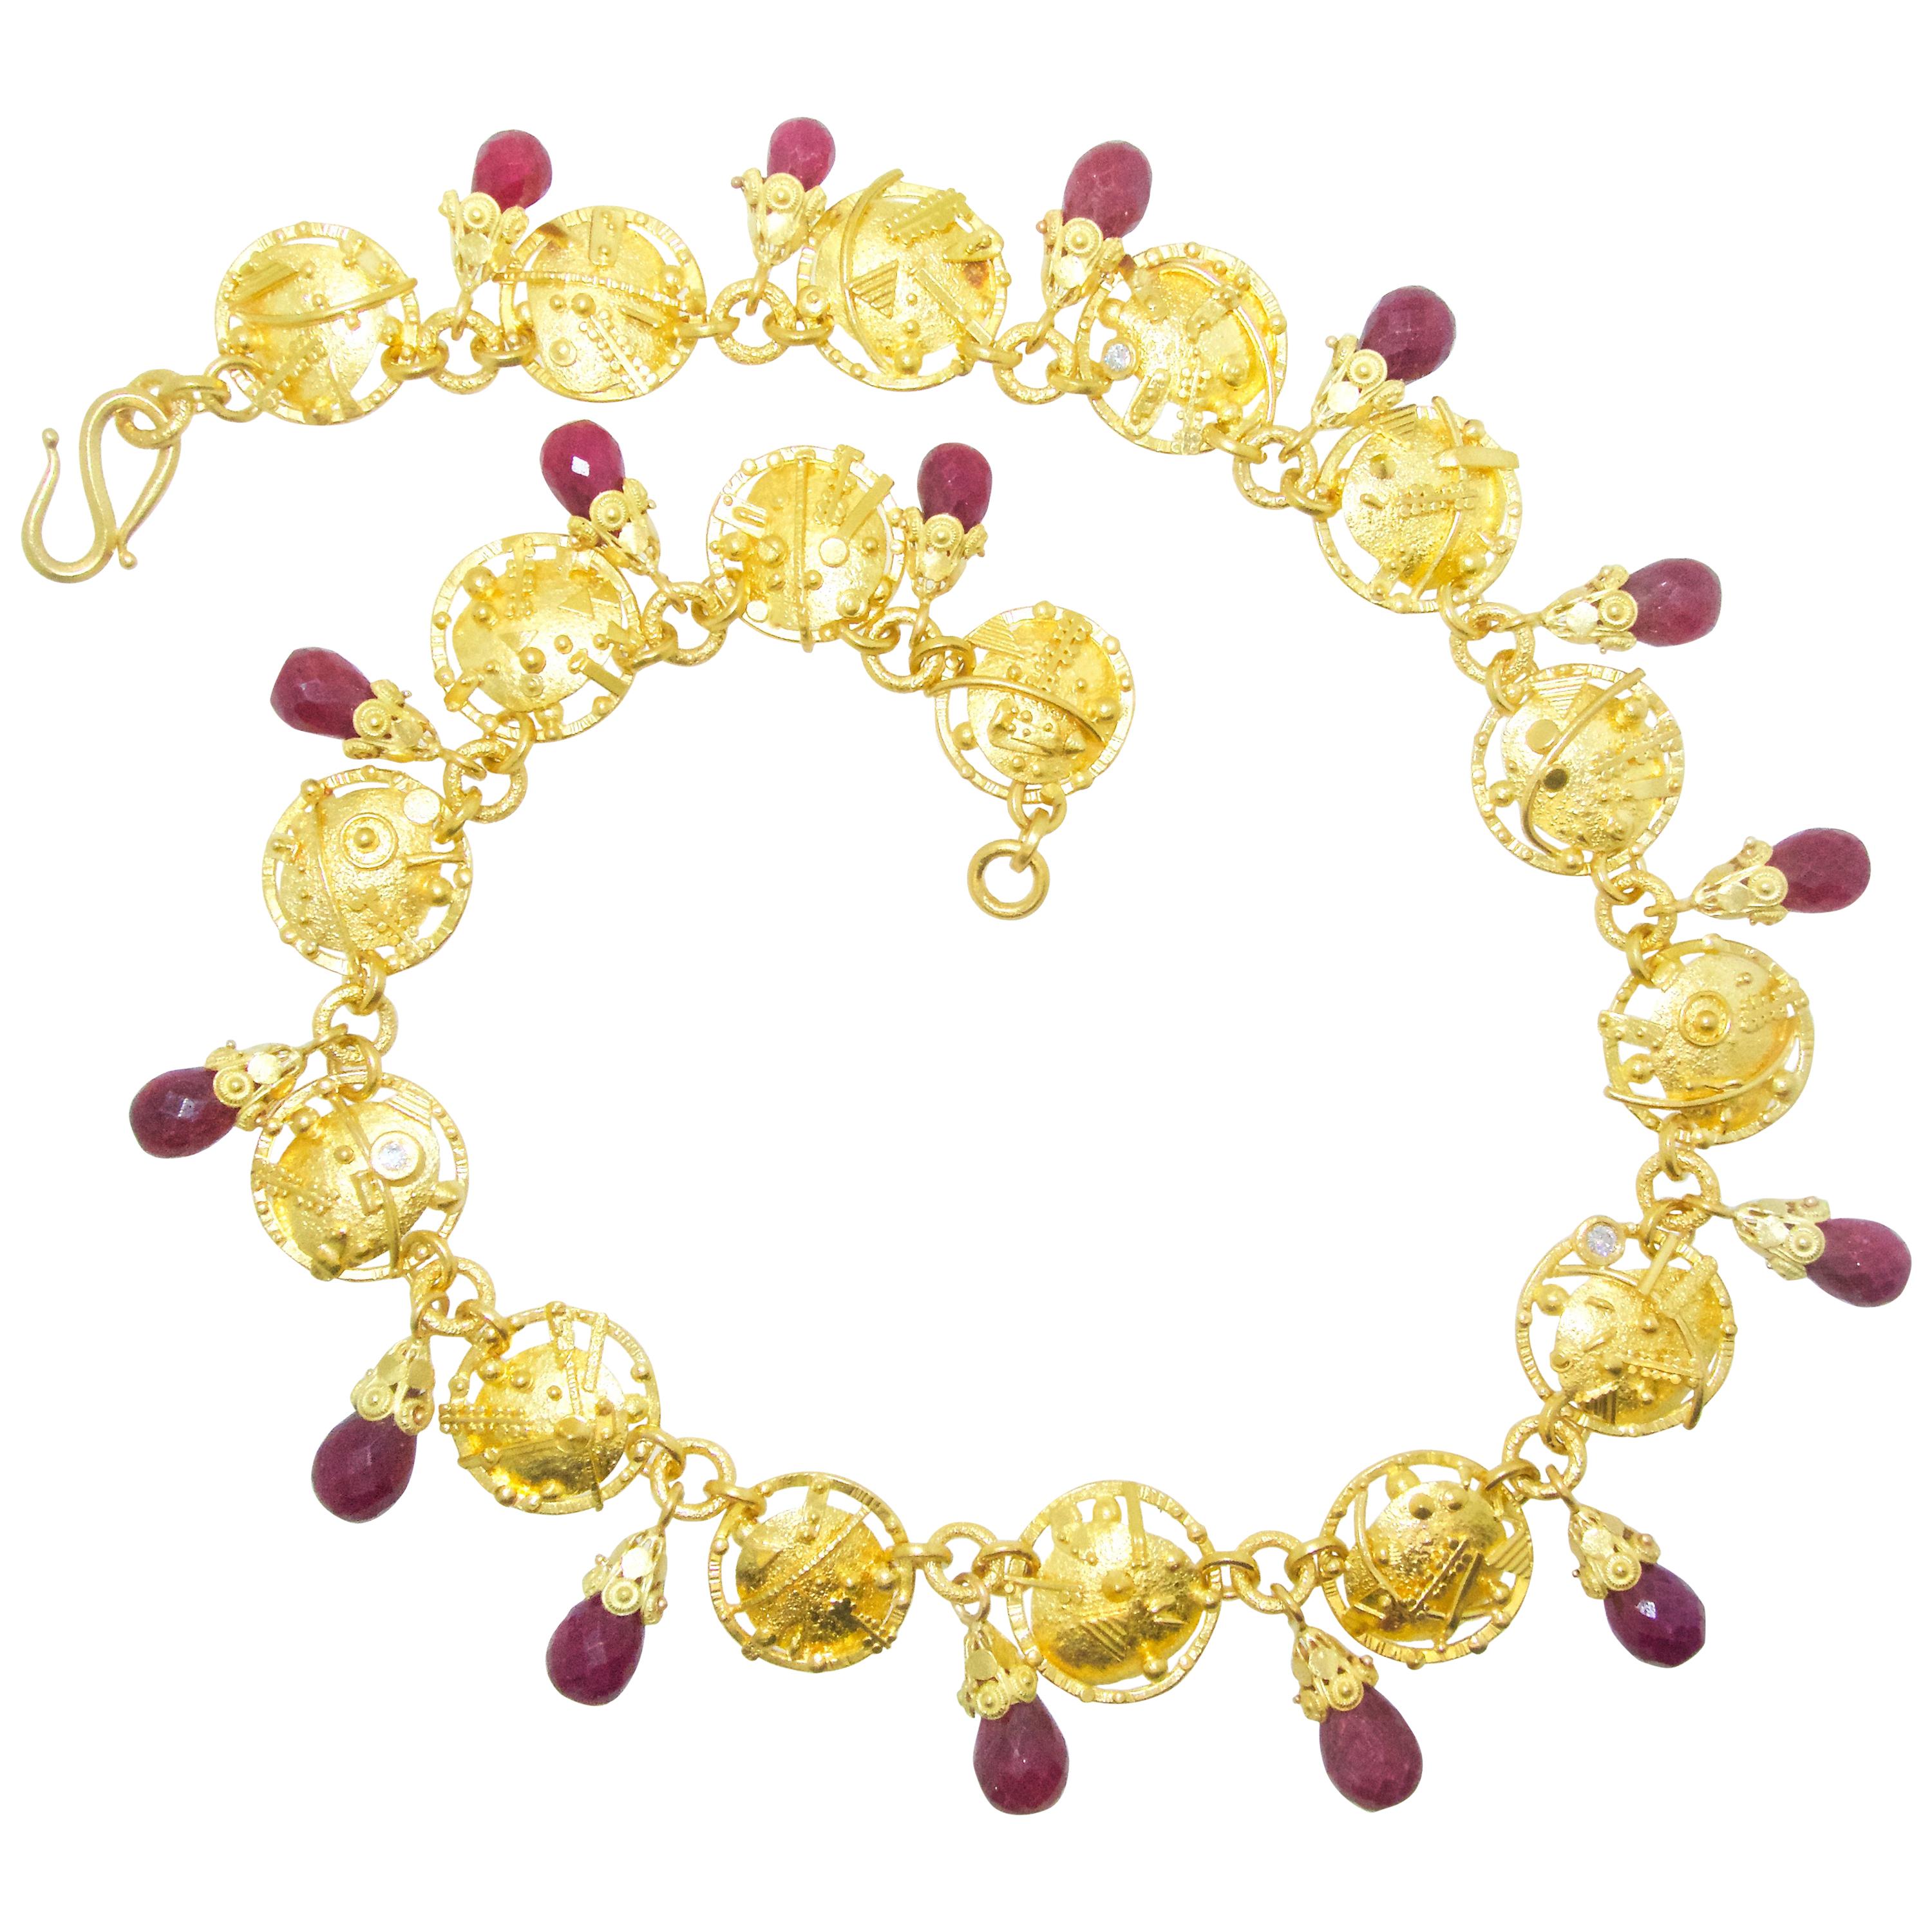 Modernistic Gold Necklace with Rubies and Diamonds